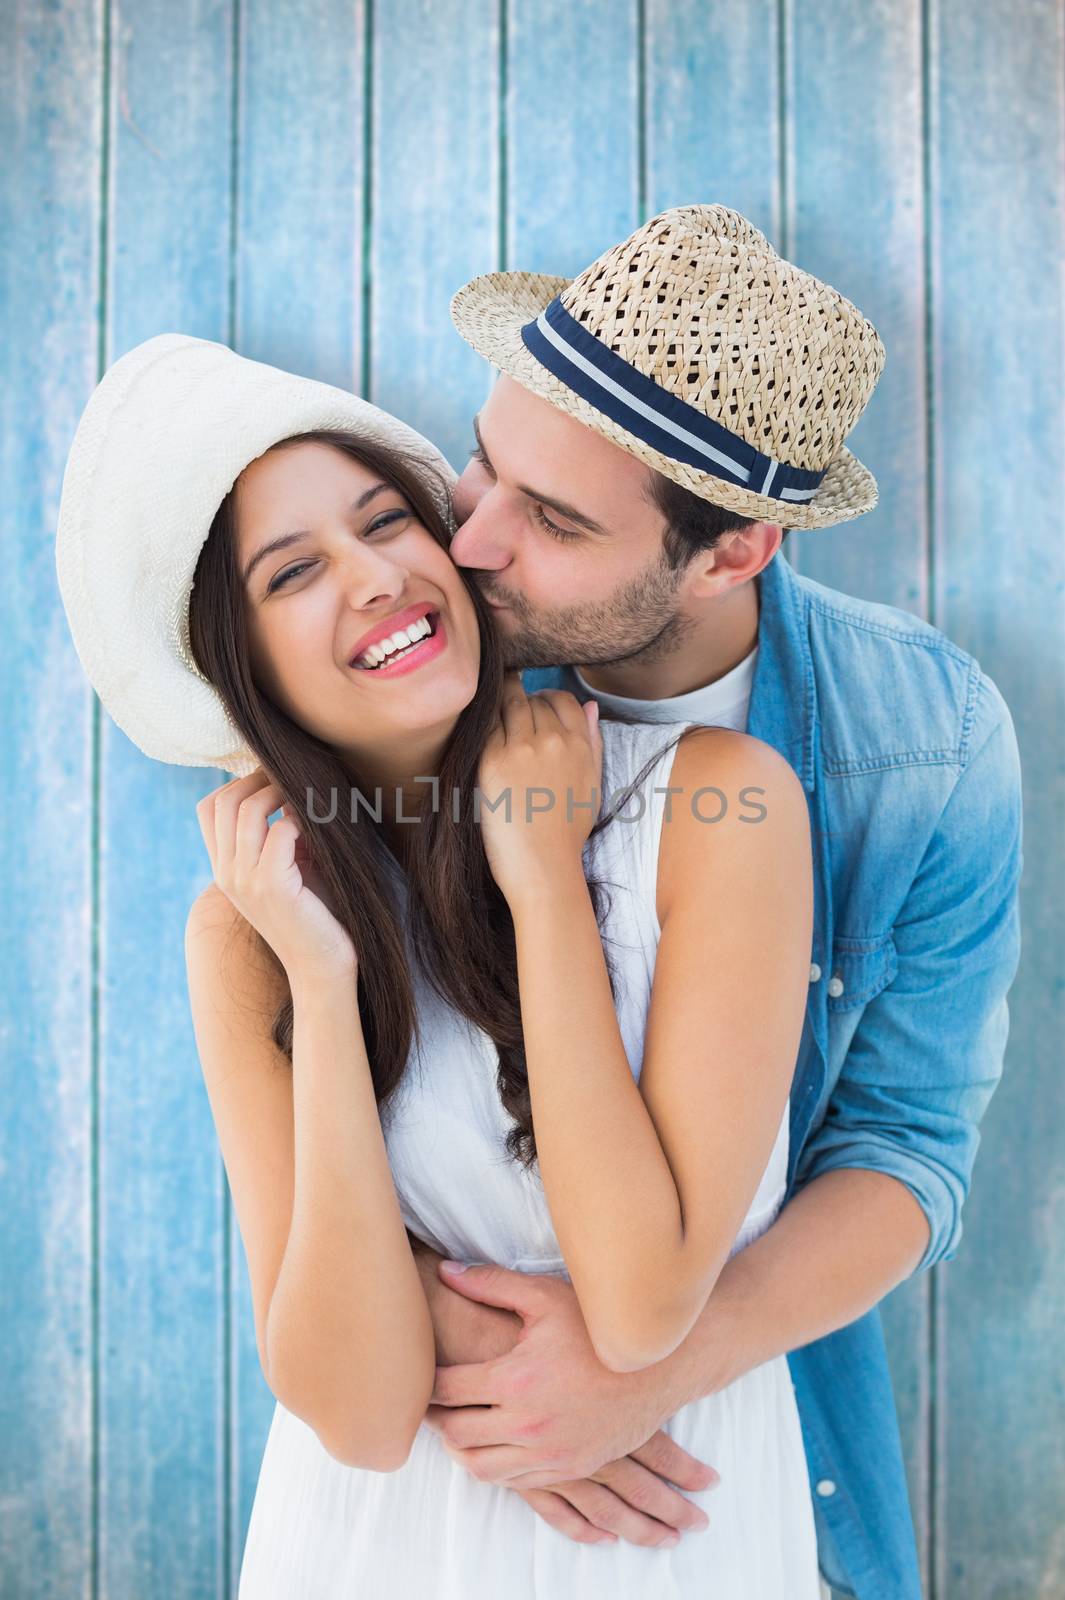 Happy hipster couple hugging and smiling against wooden planks